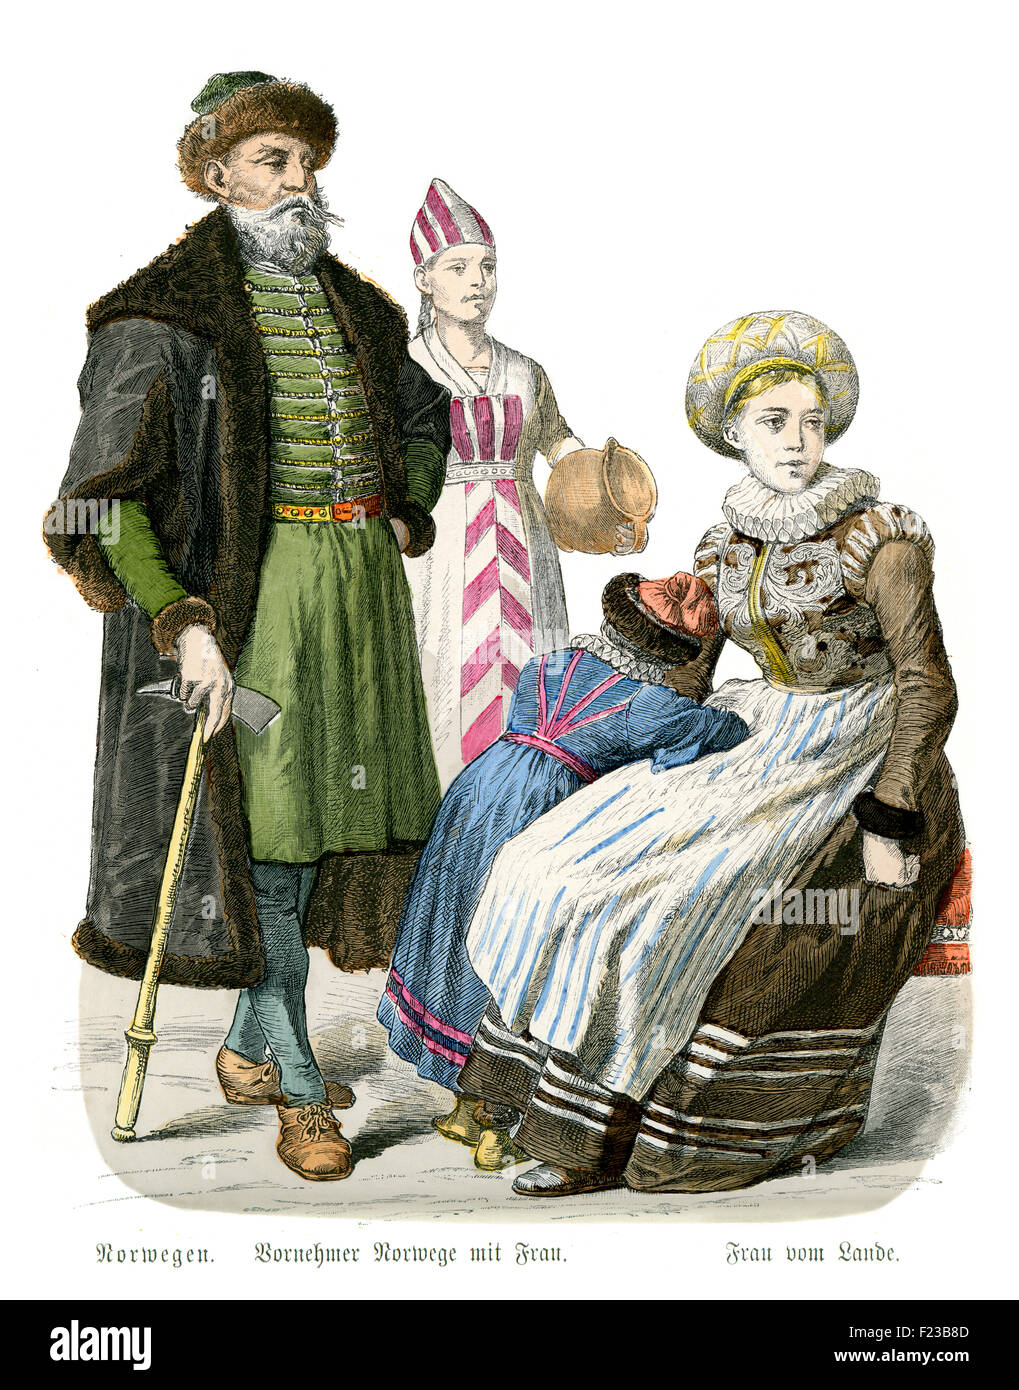 Period costumes of a nobleman and his wife from 17th Century Norway, and a Norwegian woman from the country Stock Photo